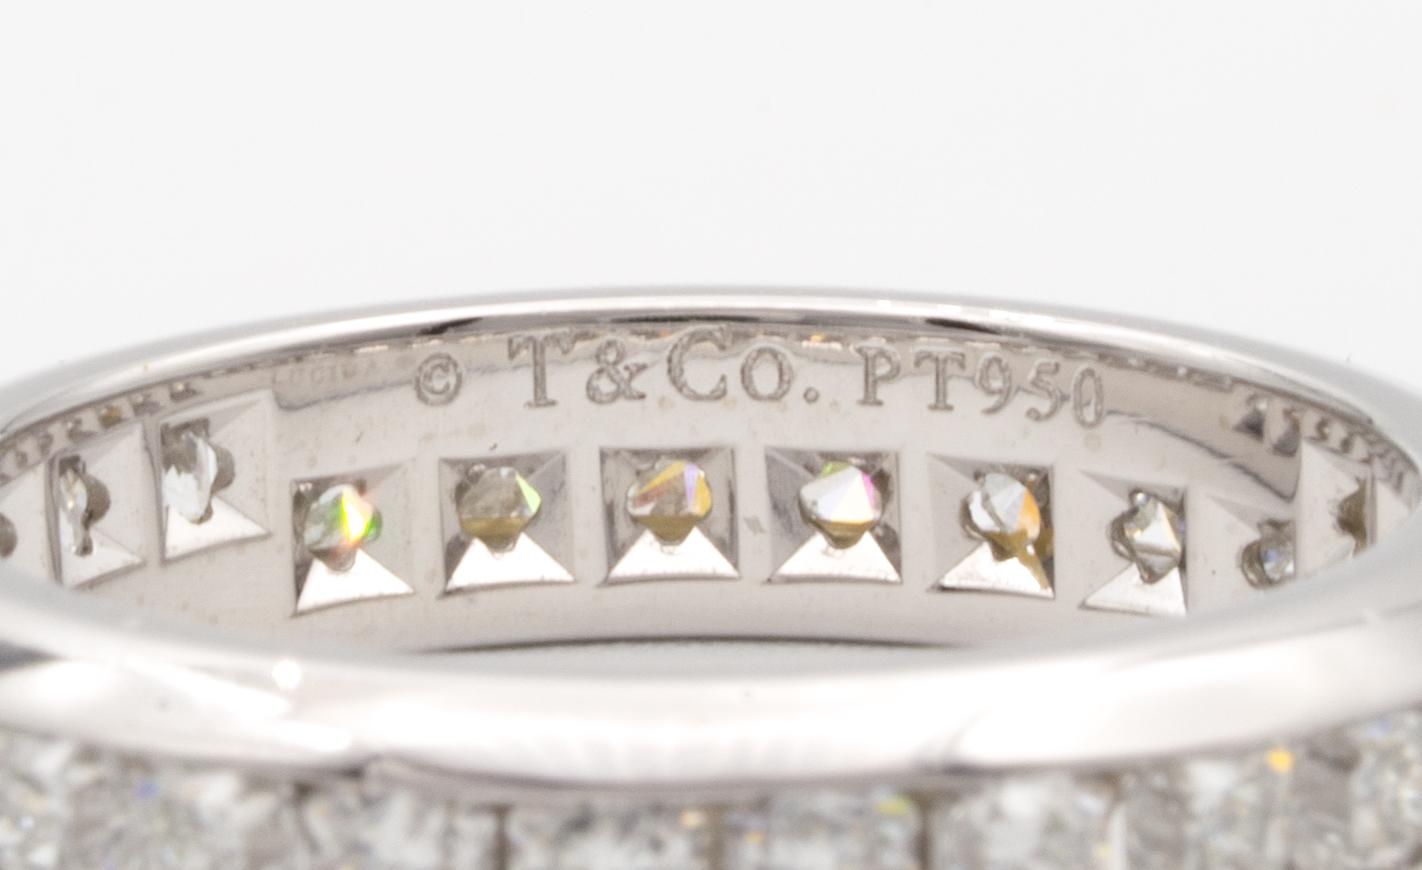 A classic Tiffany & Co. Lucida diamond eternity ring finely crafted in platinum with 28 Lucida cut channel set diamonds all the way around weighing approximately 1.37 carats. Fine quality diamonds F color, VVS2-VS1 clarity. The band measures 4.15 mm